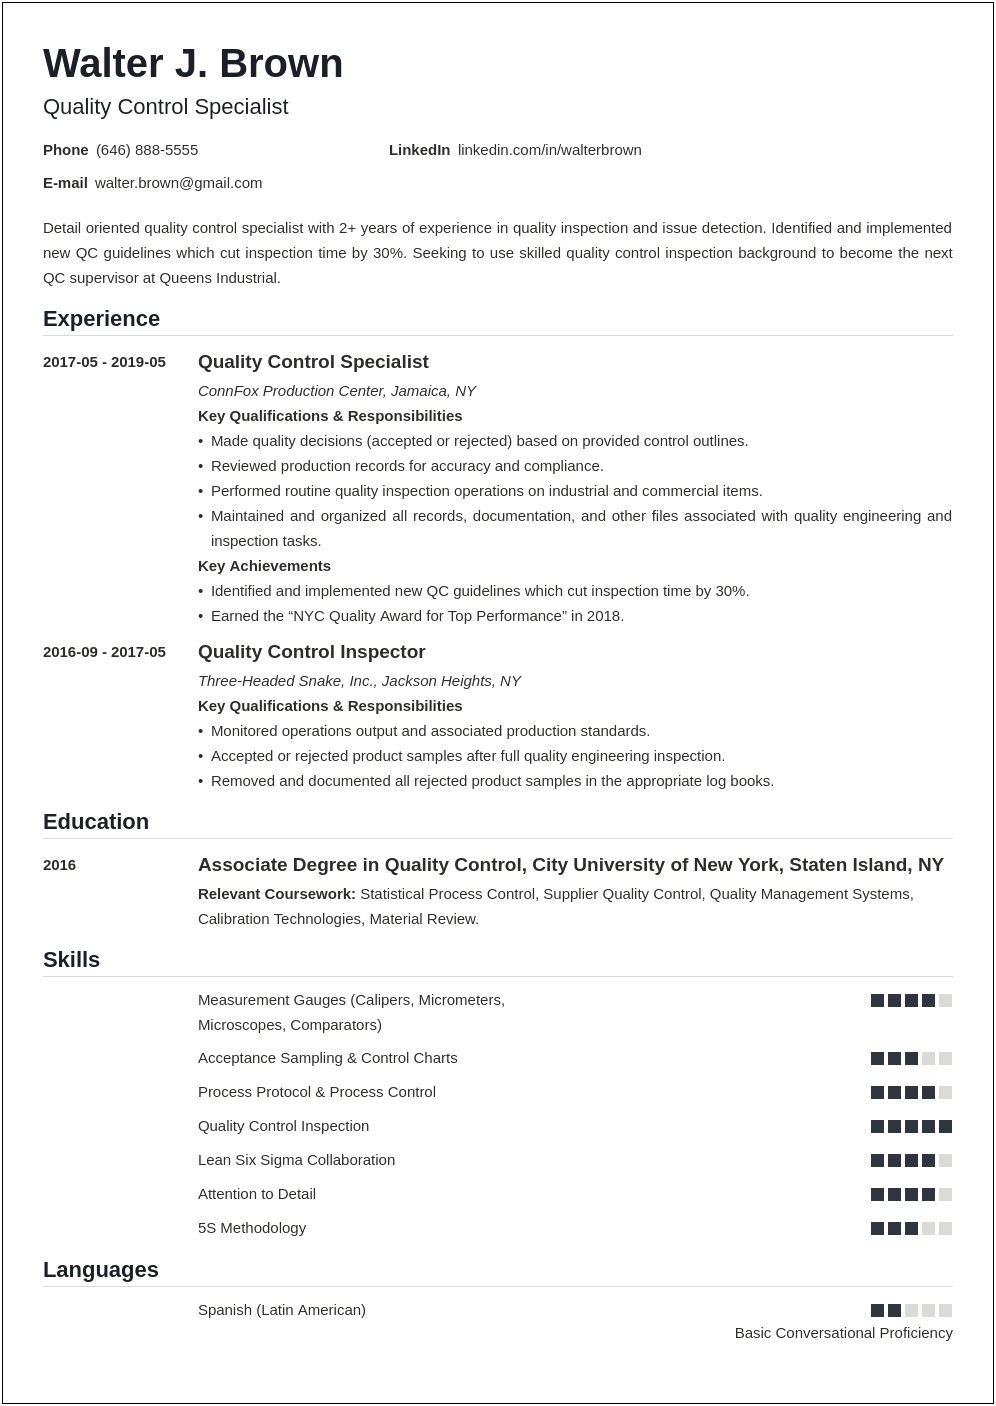 Document Control Specialist Resume Objective